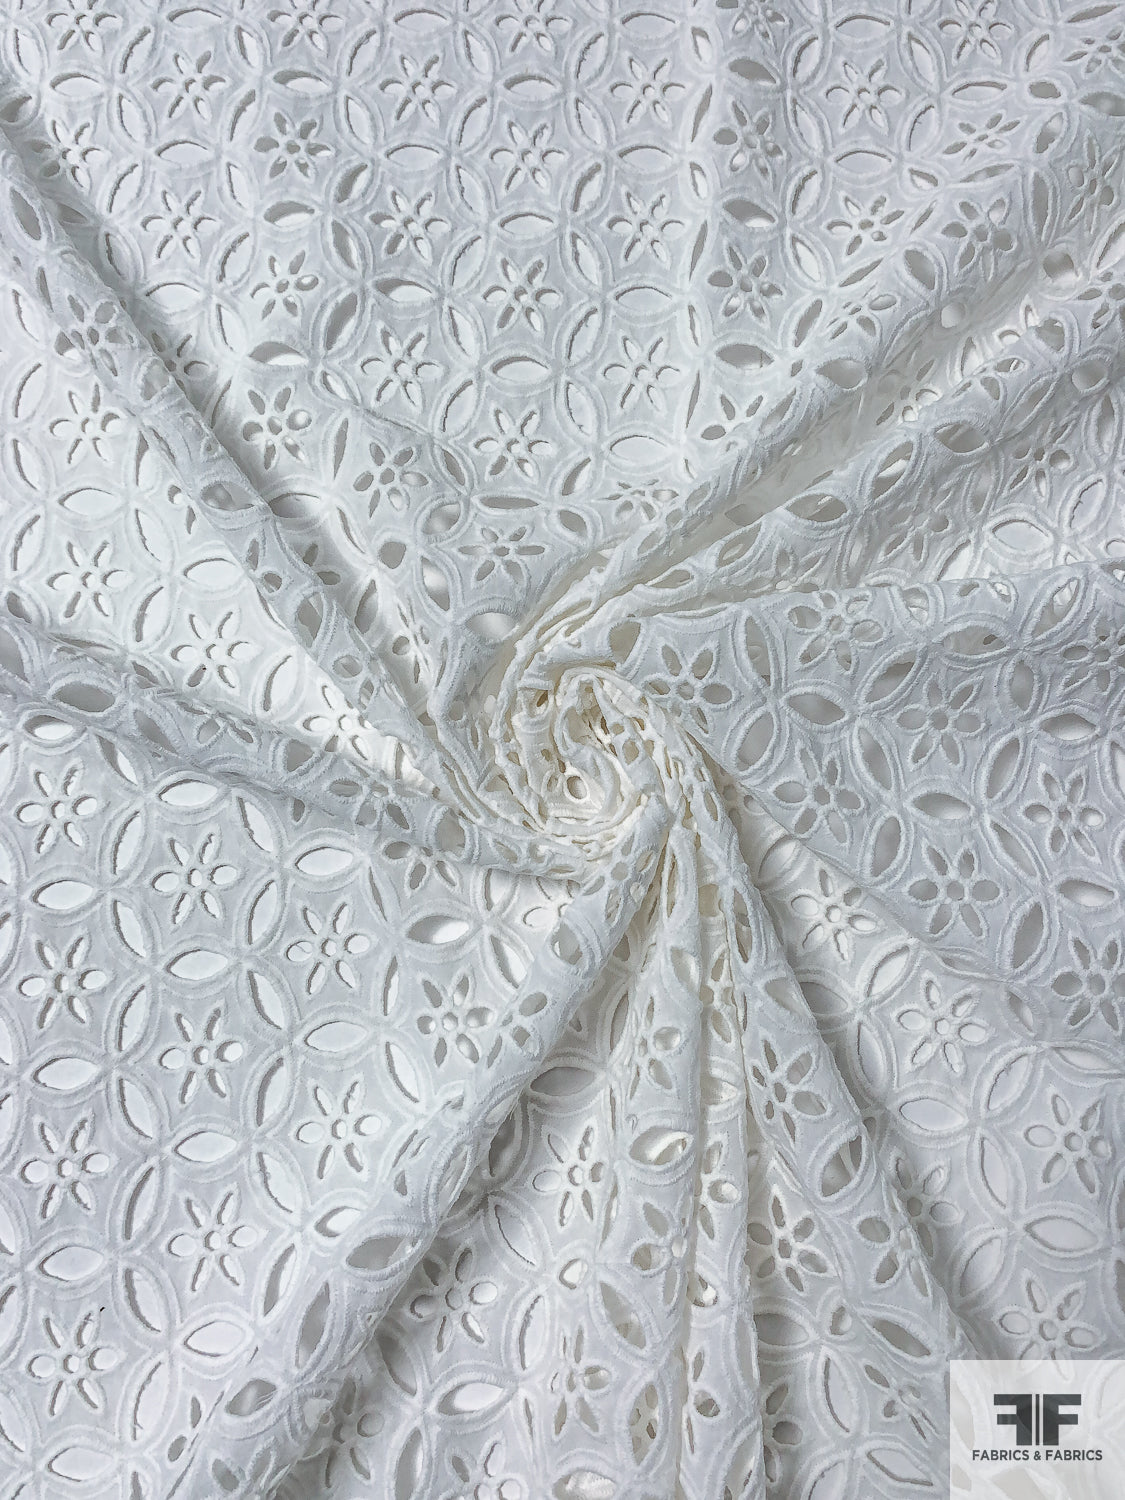 Cotton Twill Fabric by the Yard, 100% White Cotton Twill Embroidery Fabric,  White Embroidery Cloth 